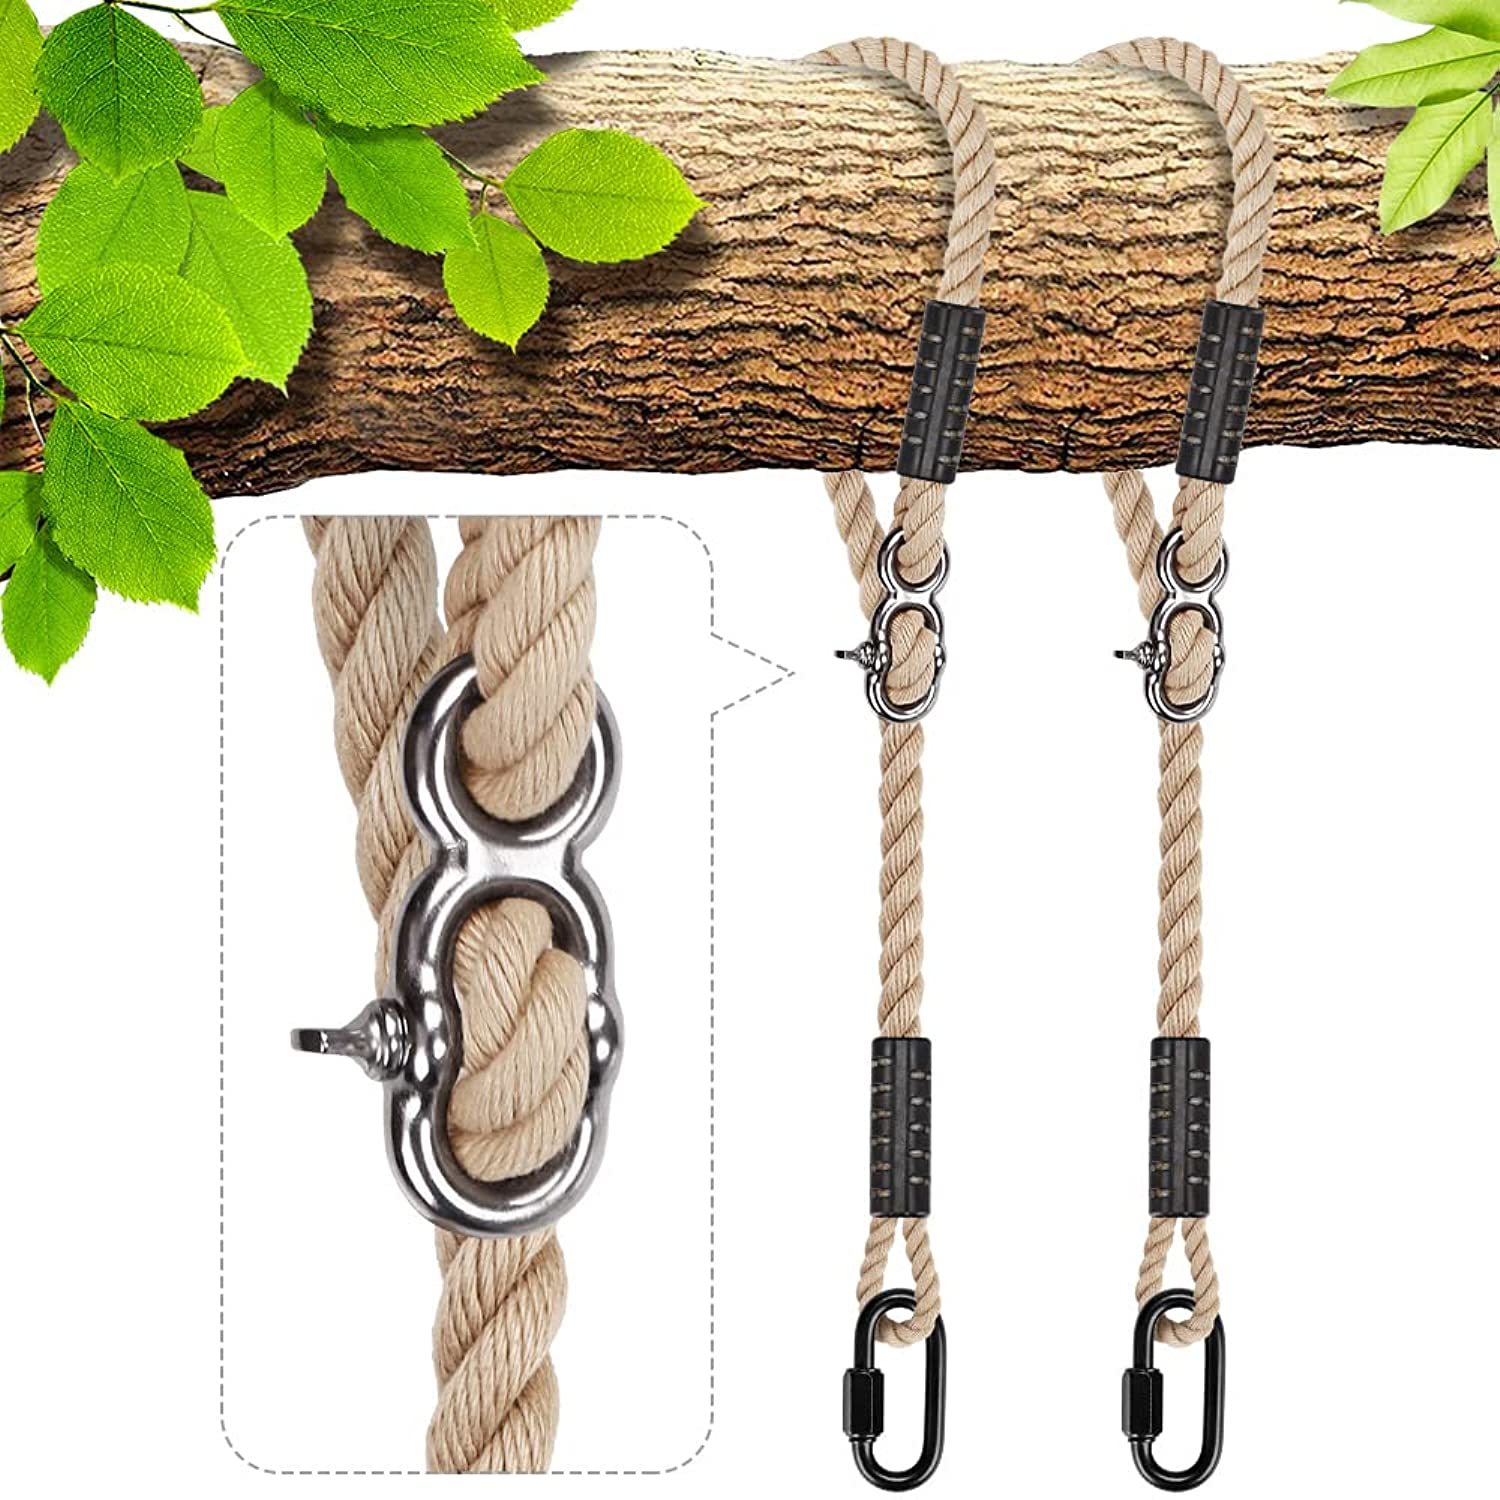 Tree Swing Ropes, Hammock Tree Swings Hanging Straps, Adjustable Extendable, For - $36.09